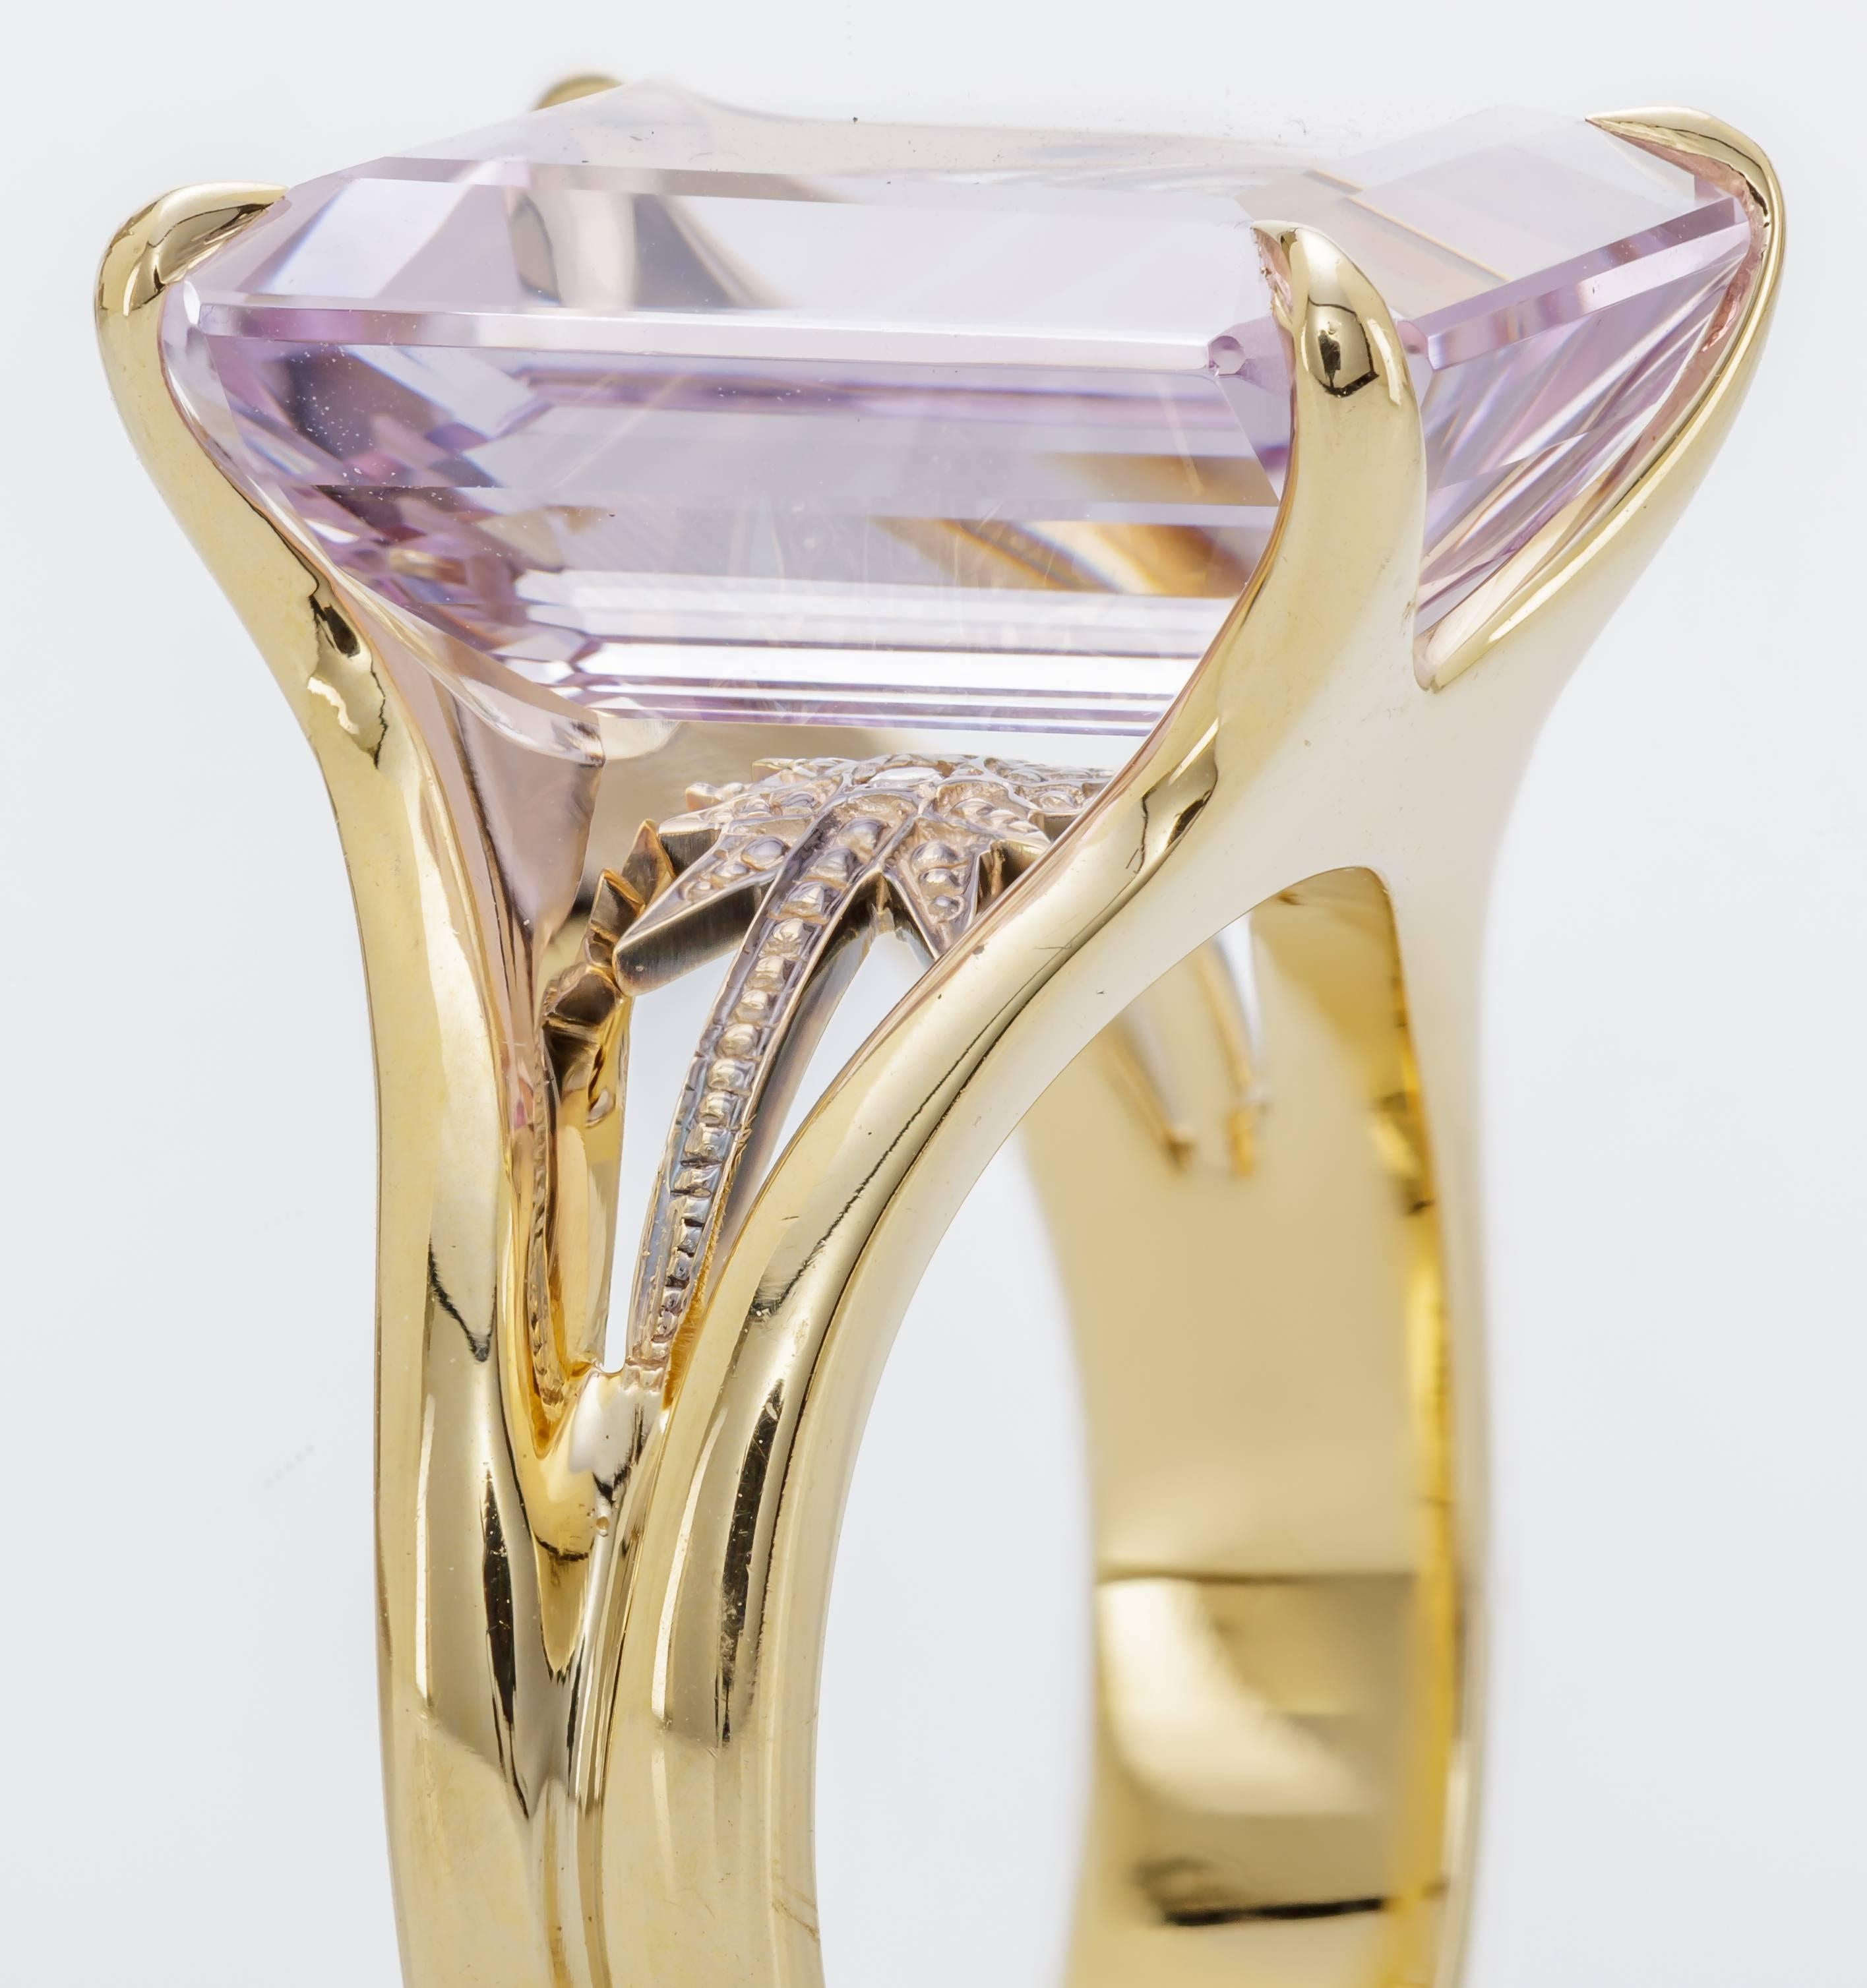 This new H. Stern ring features a 12.69ct amethyst set in 18k noble gold.  There is a 0.01ct round diamond set below the amethyst.  Noble gold, H. Stern's signature alloy, has the warmth of yellow gold and the elegance of white gold.  The ring is a